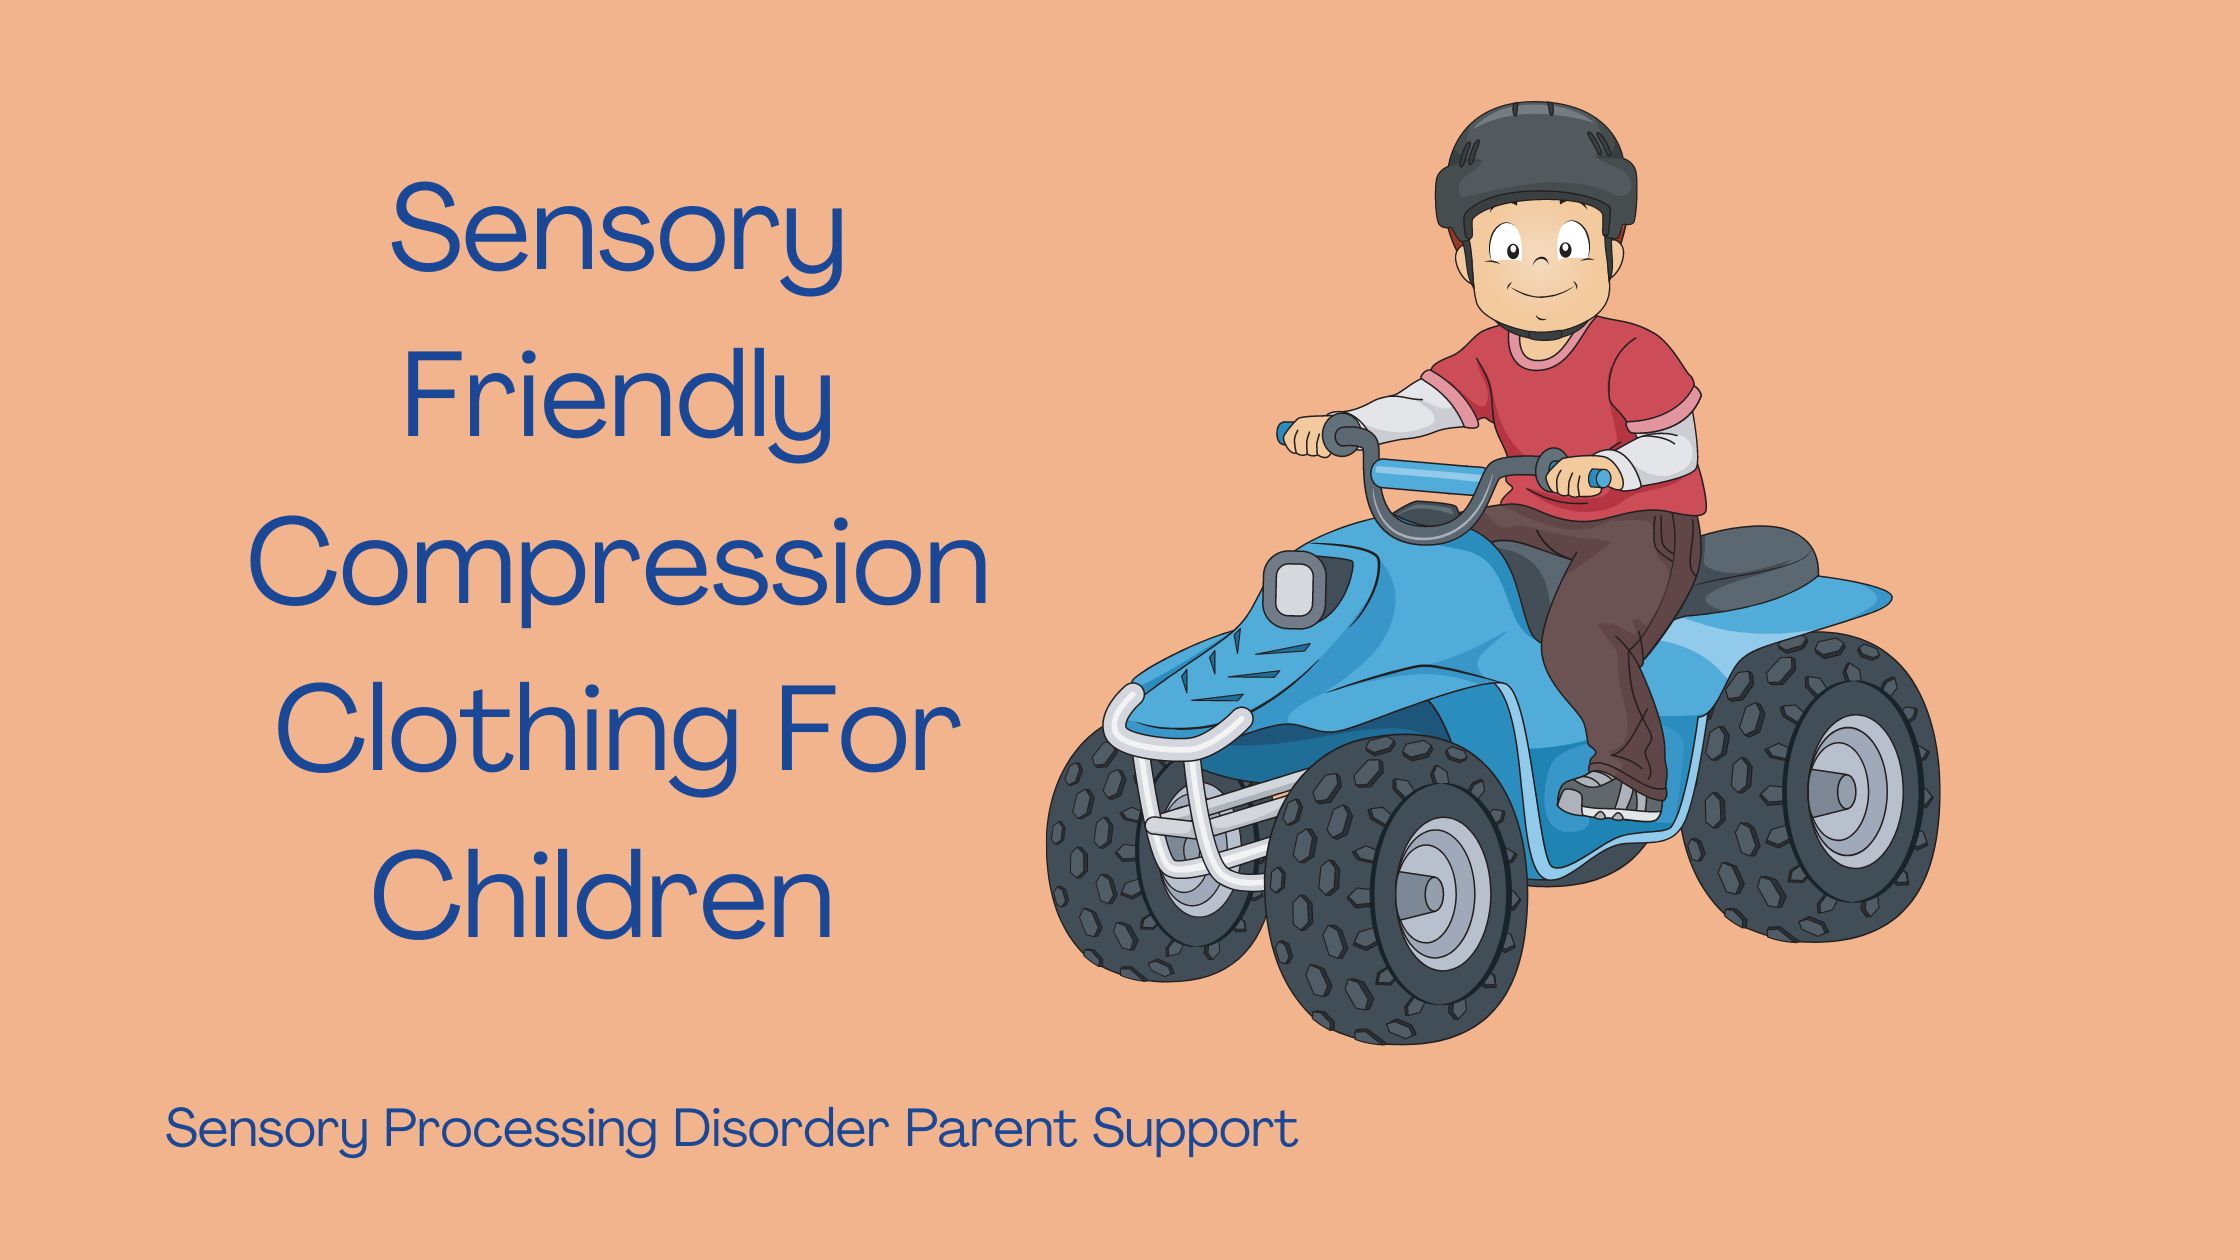 child with sensory processing disorder on a trike wearing a helmet and compression shirt Sensory Friendly Compression Clothing For Children